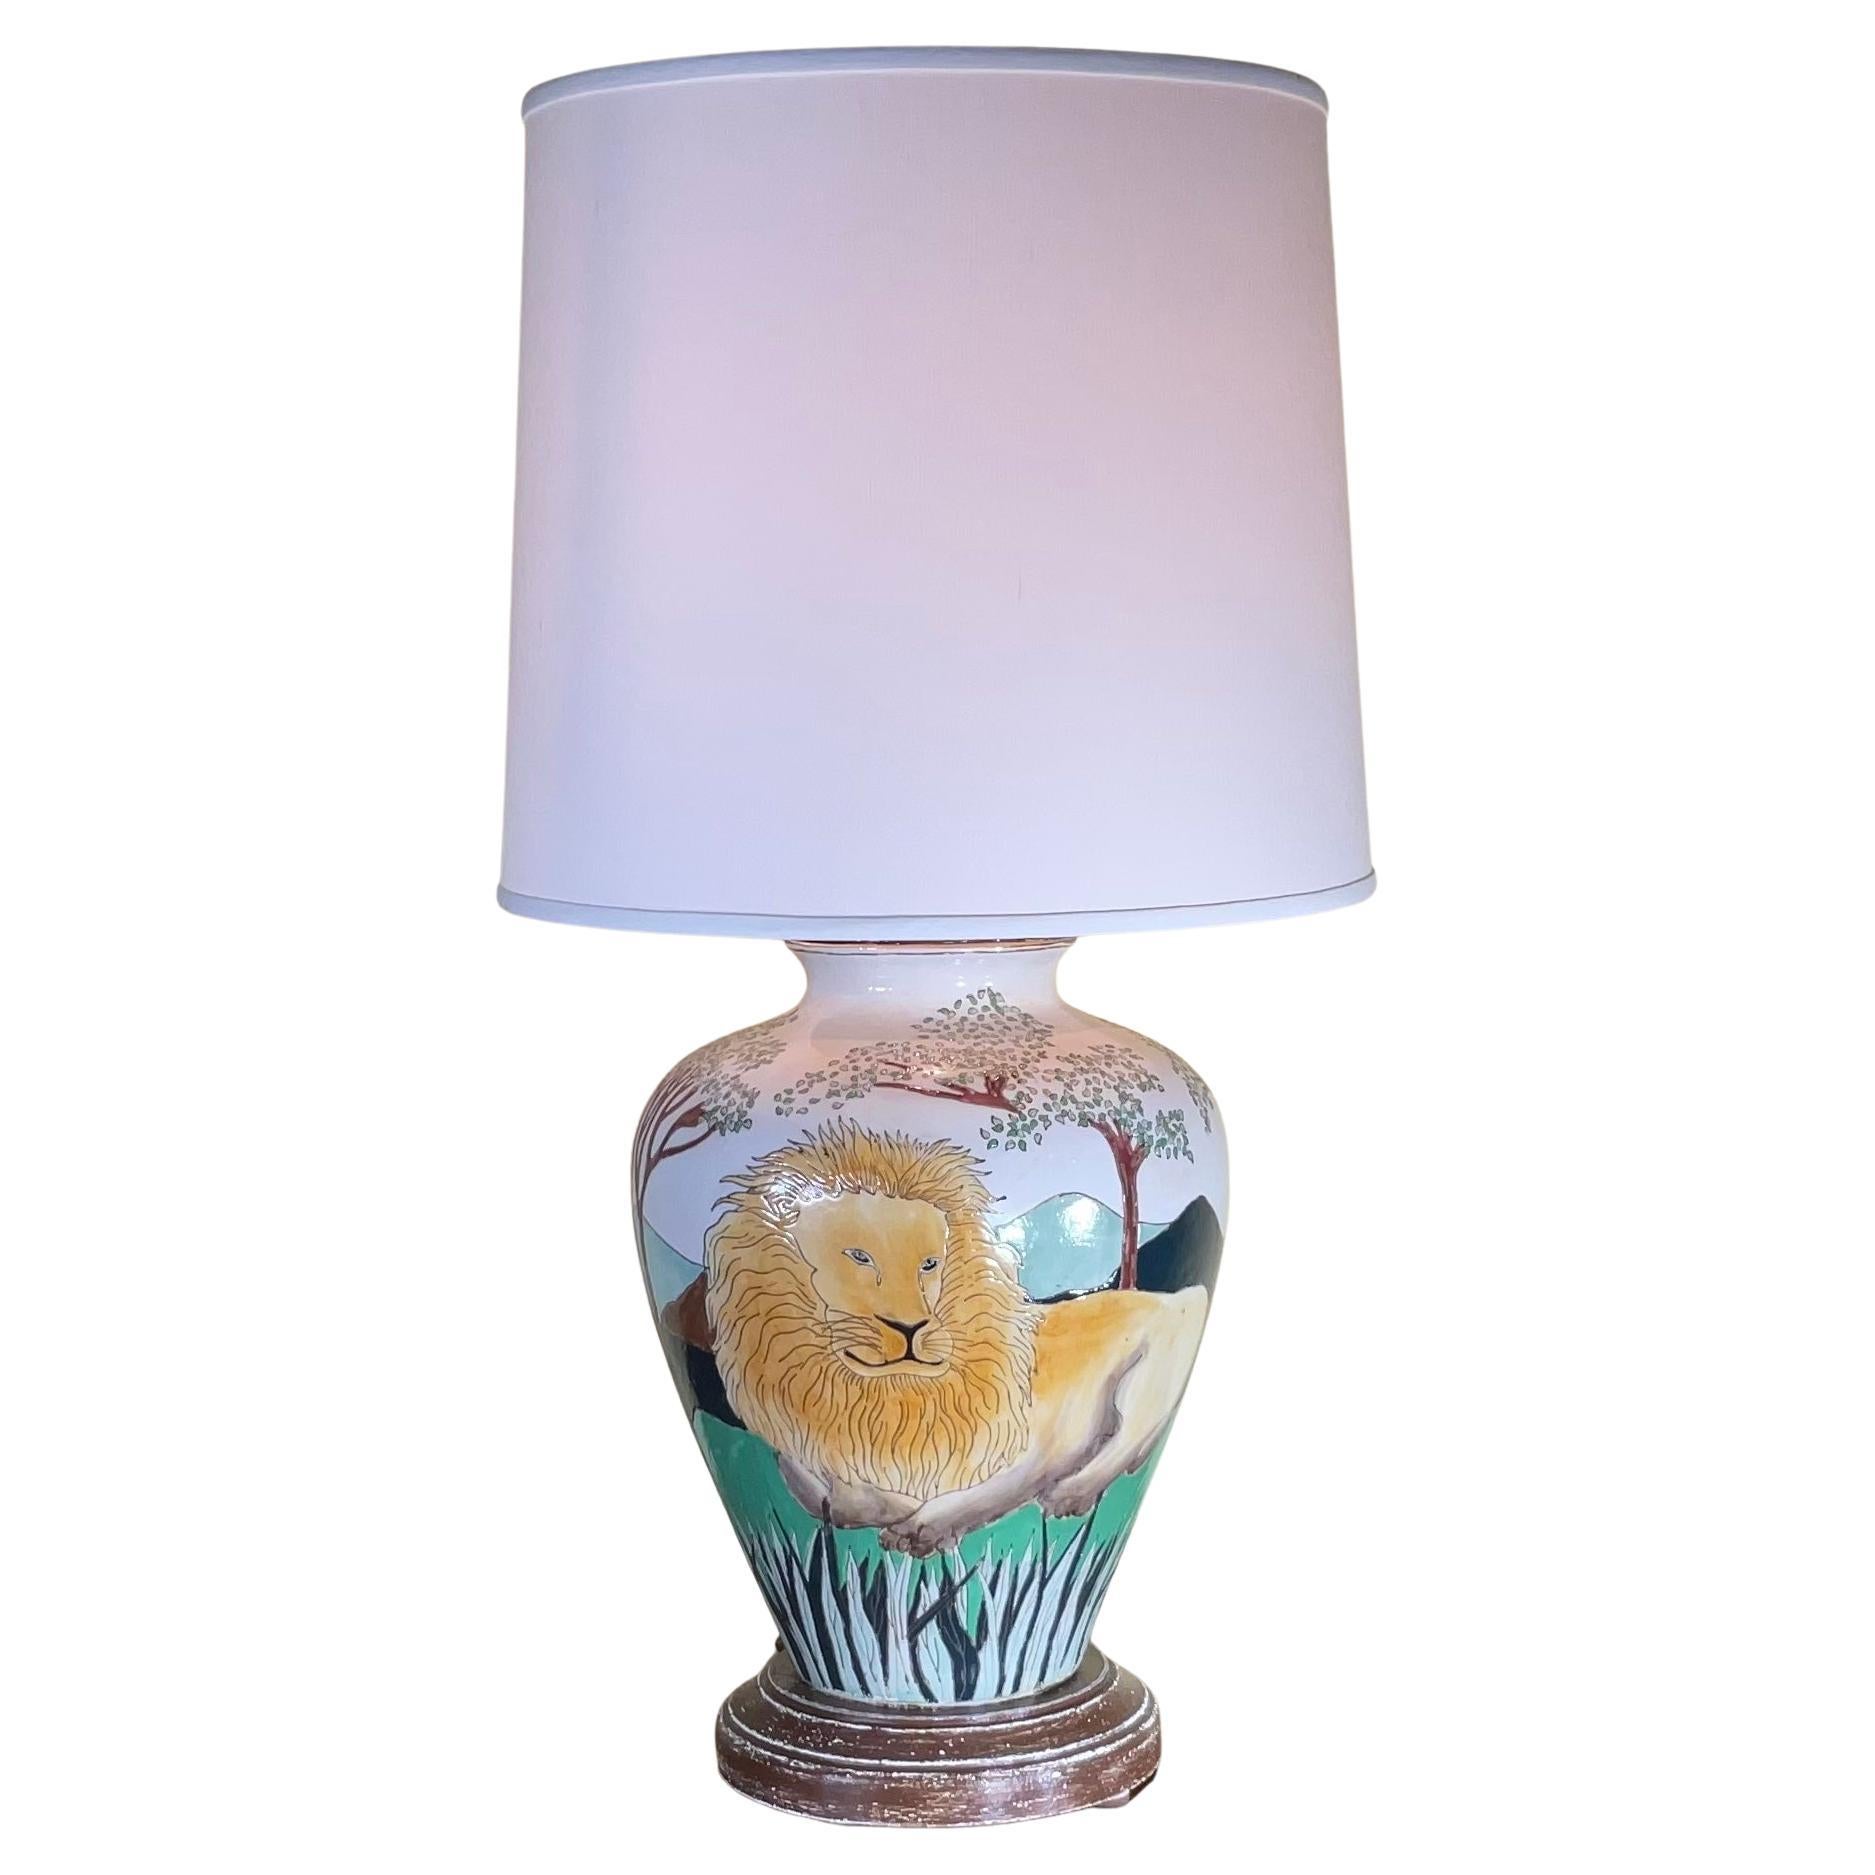 Lions Hand Painted Ceramic Table Lamp